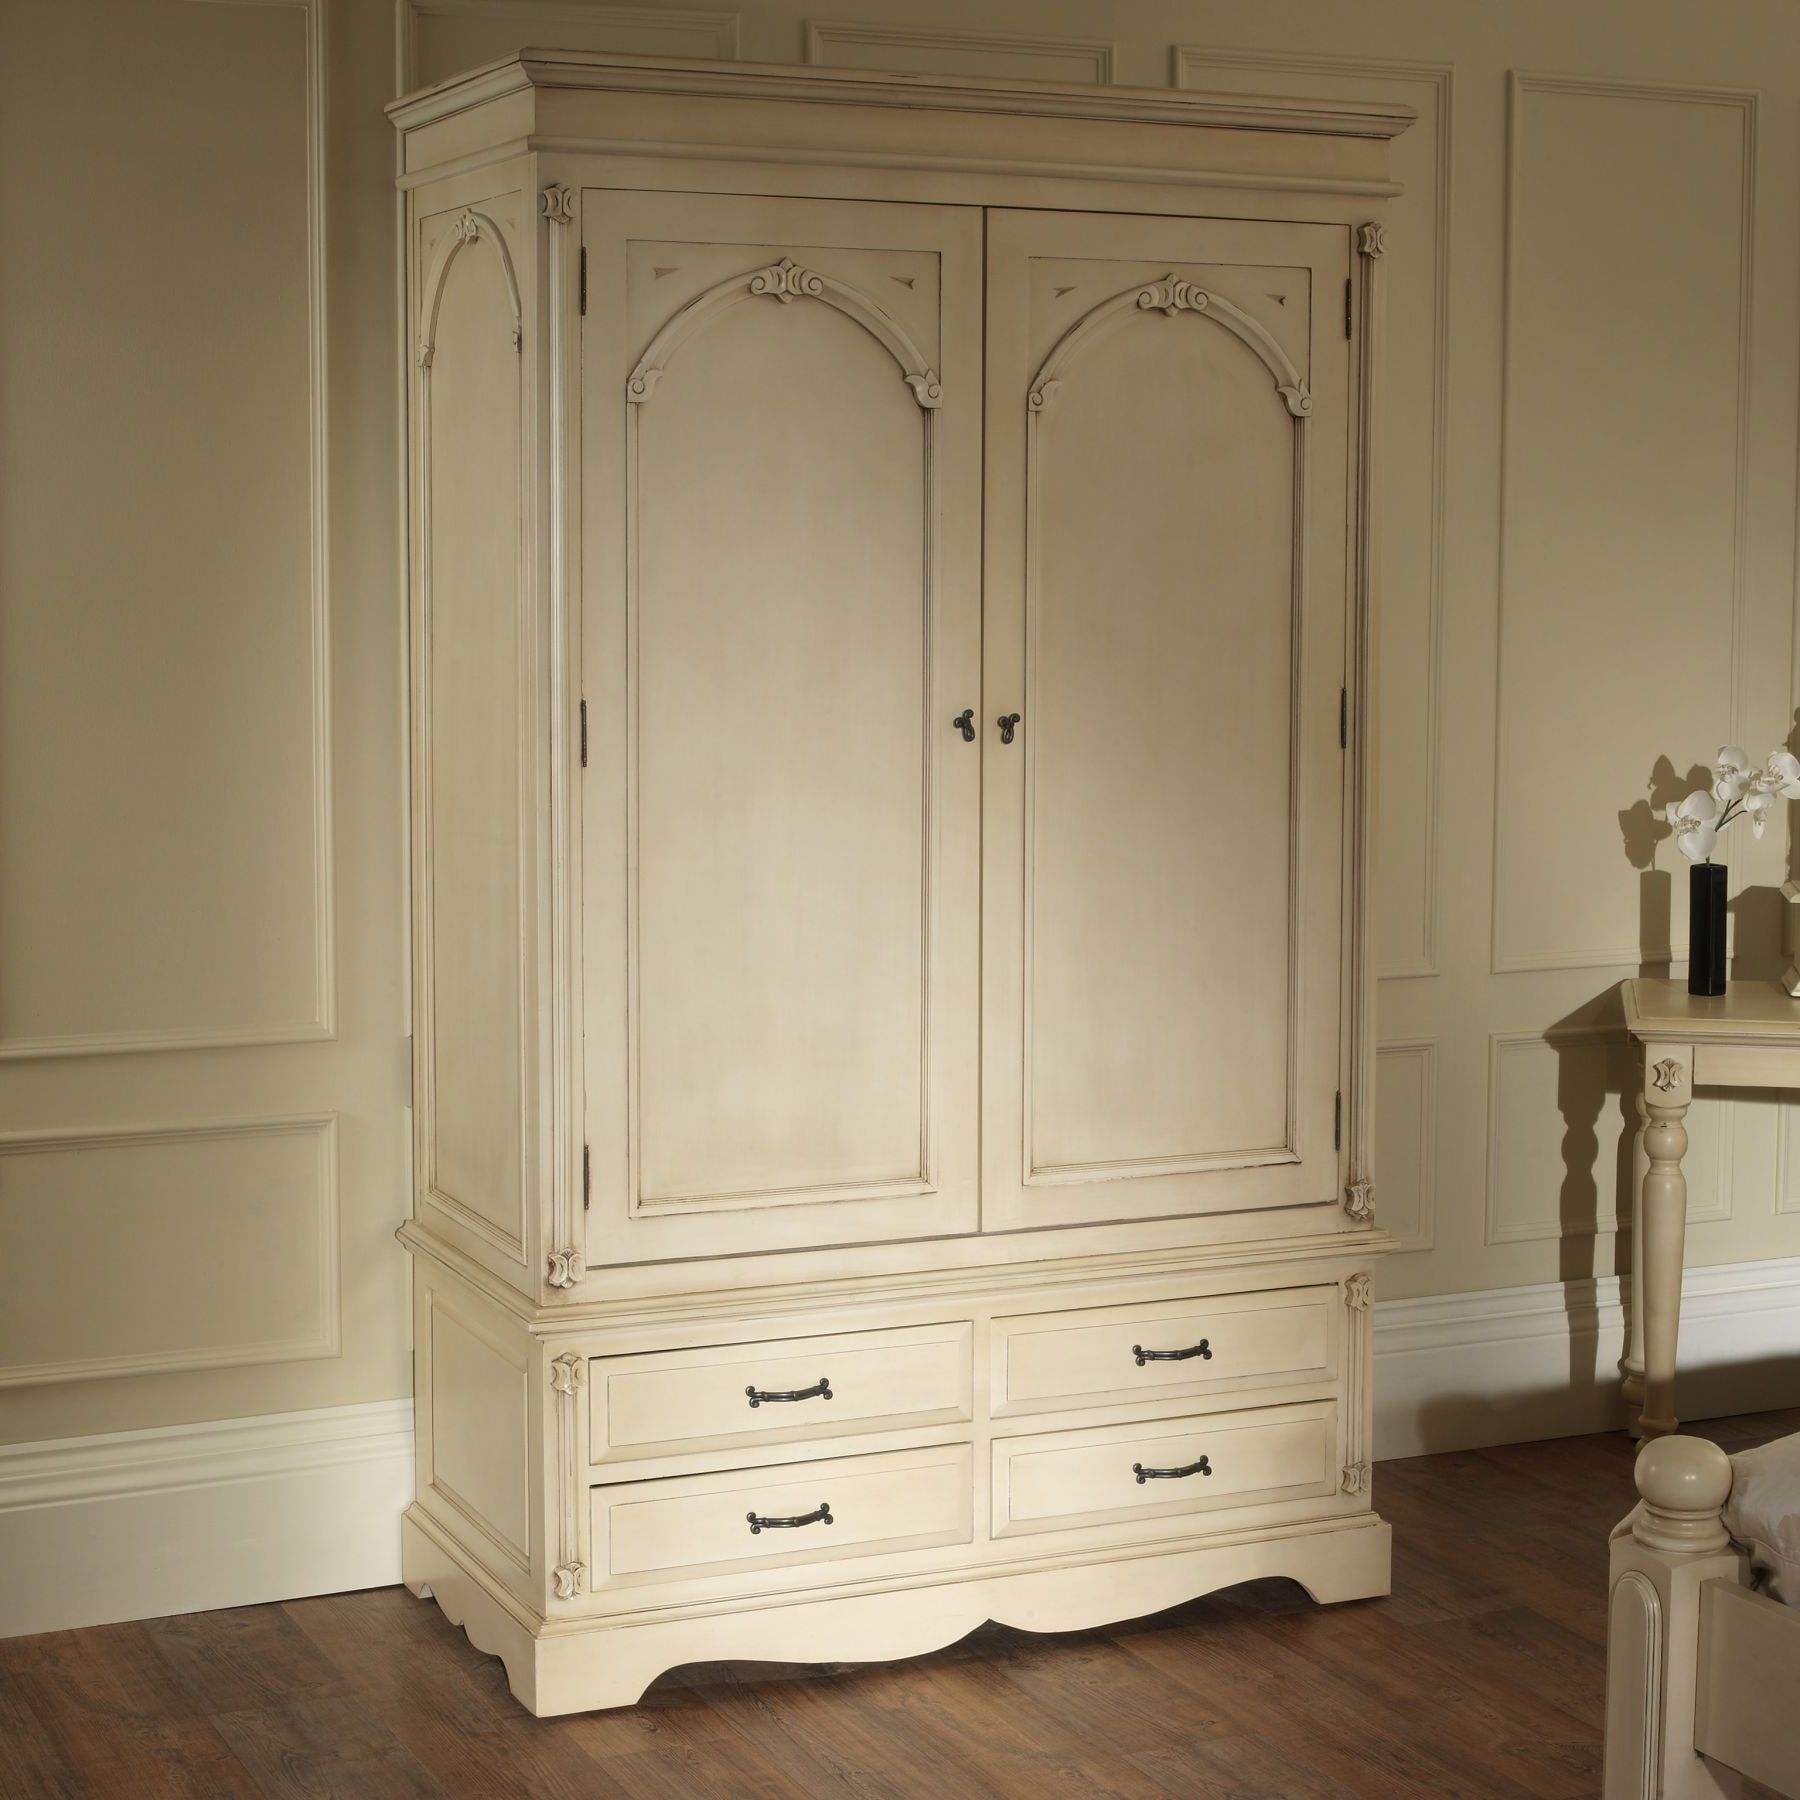 Victorian Antique French Wardrobe Works Well Alongside Our Shabby Chic  Furniture Regarding Cream French Wardrobes (View 7 of 20)